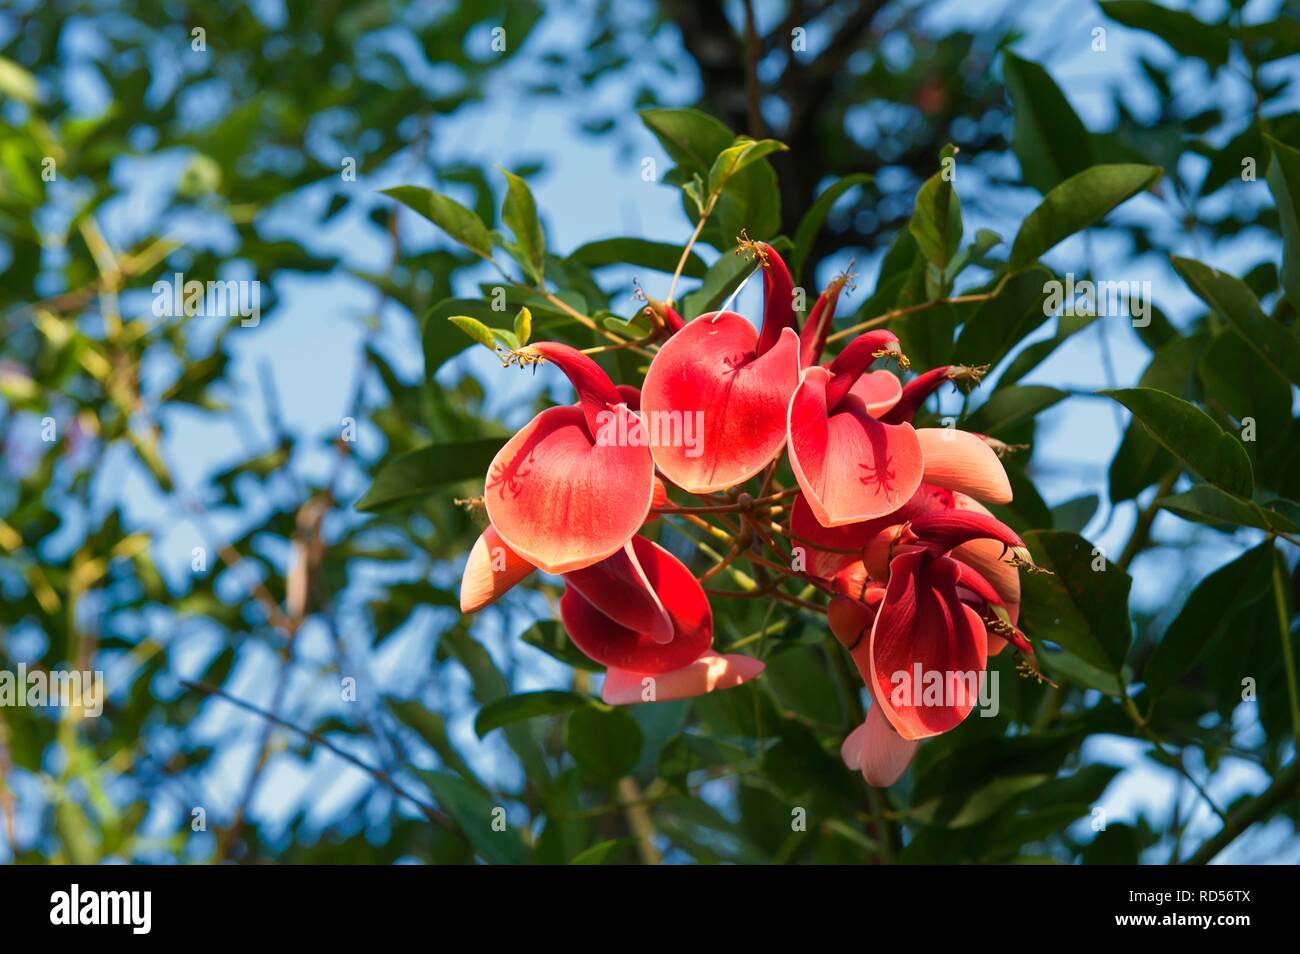 Ceibo flowers, cockspur coral tree (Erythrina crista-galli), national tree of Argentina, Gualeguaychu, Entre Rios province Stock Photo